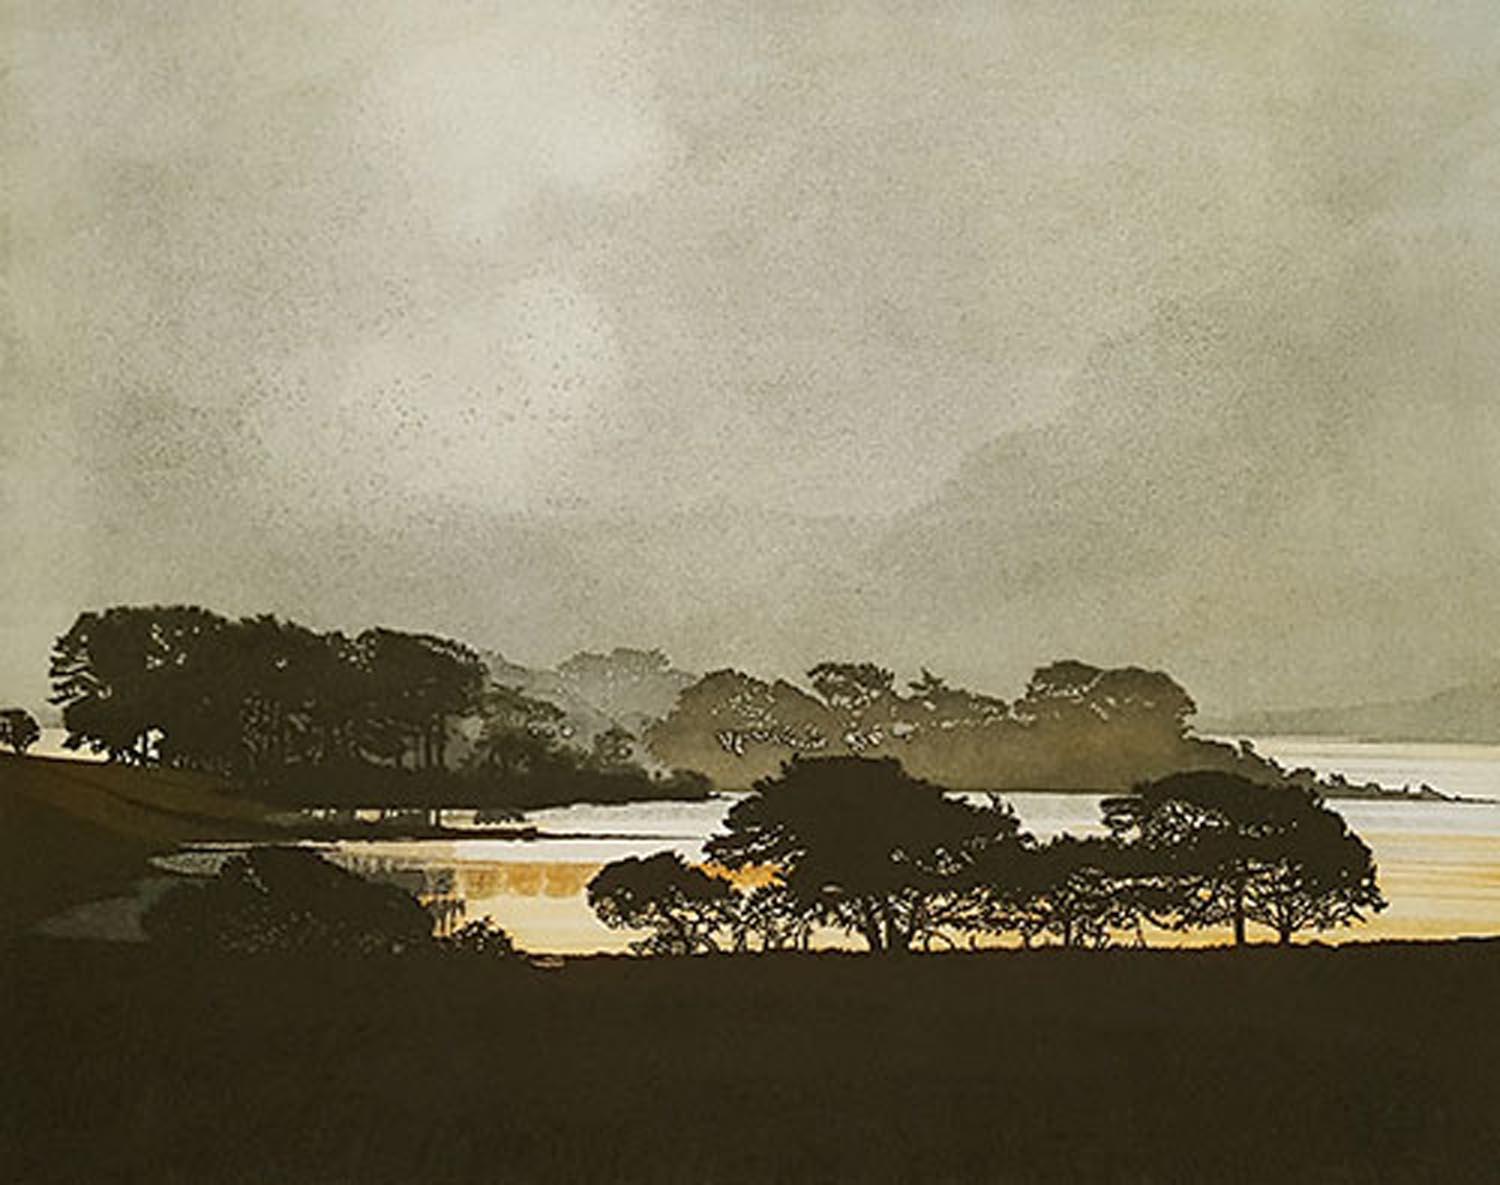 Phil Greenwood Landscape Print - After the Storm, Limited Edition Print, Landscape Etching Print in Greens